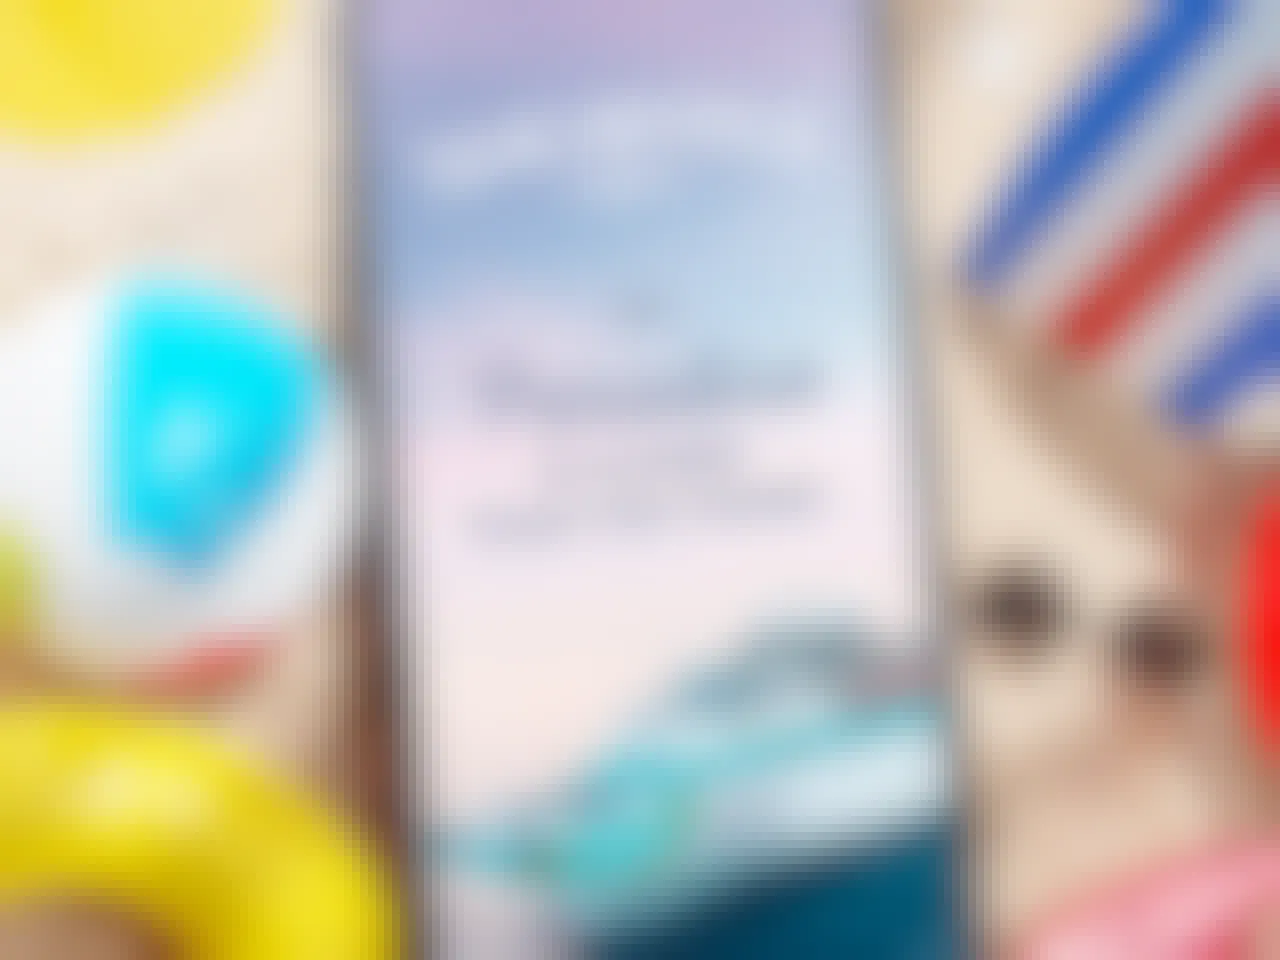 A phone sitting on sand with beach accessories around it, the screen displaying an image of the Margaritaville at Sea cruise ship and the words "Paradise is closer than you think